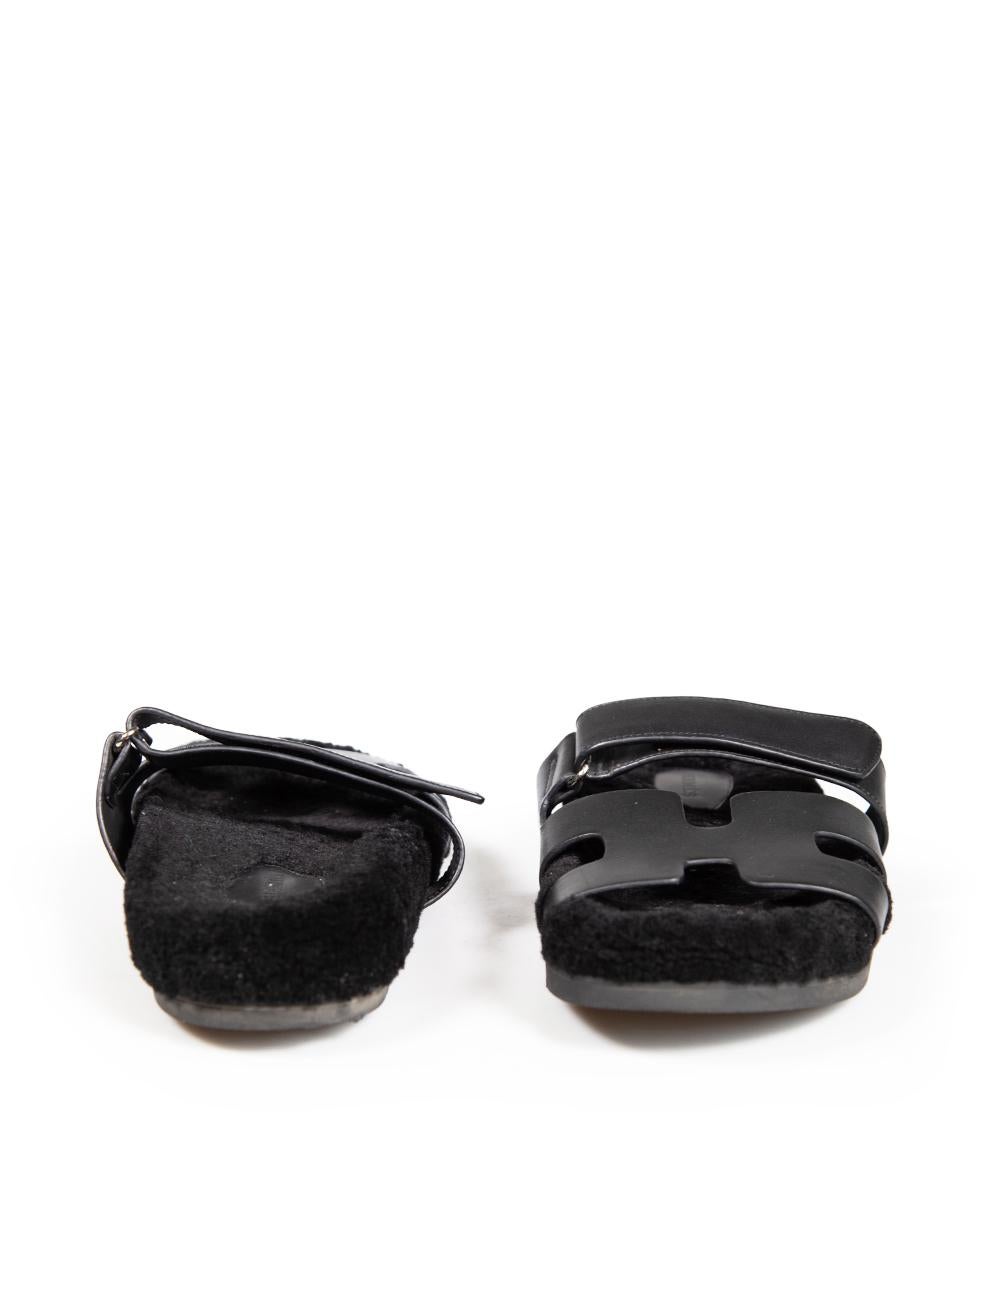 Hermès Black Leather Chypre Sandals Size IT 40 In Good Condition For Sale In London, GB